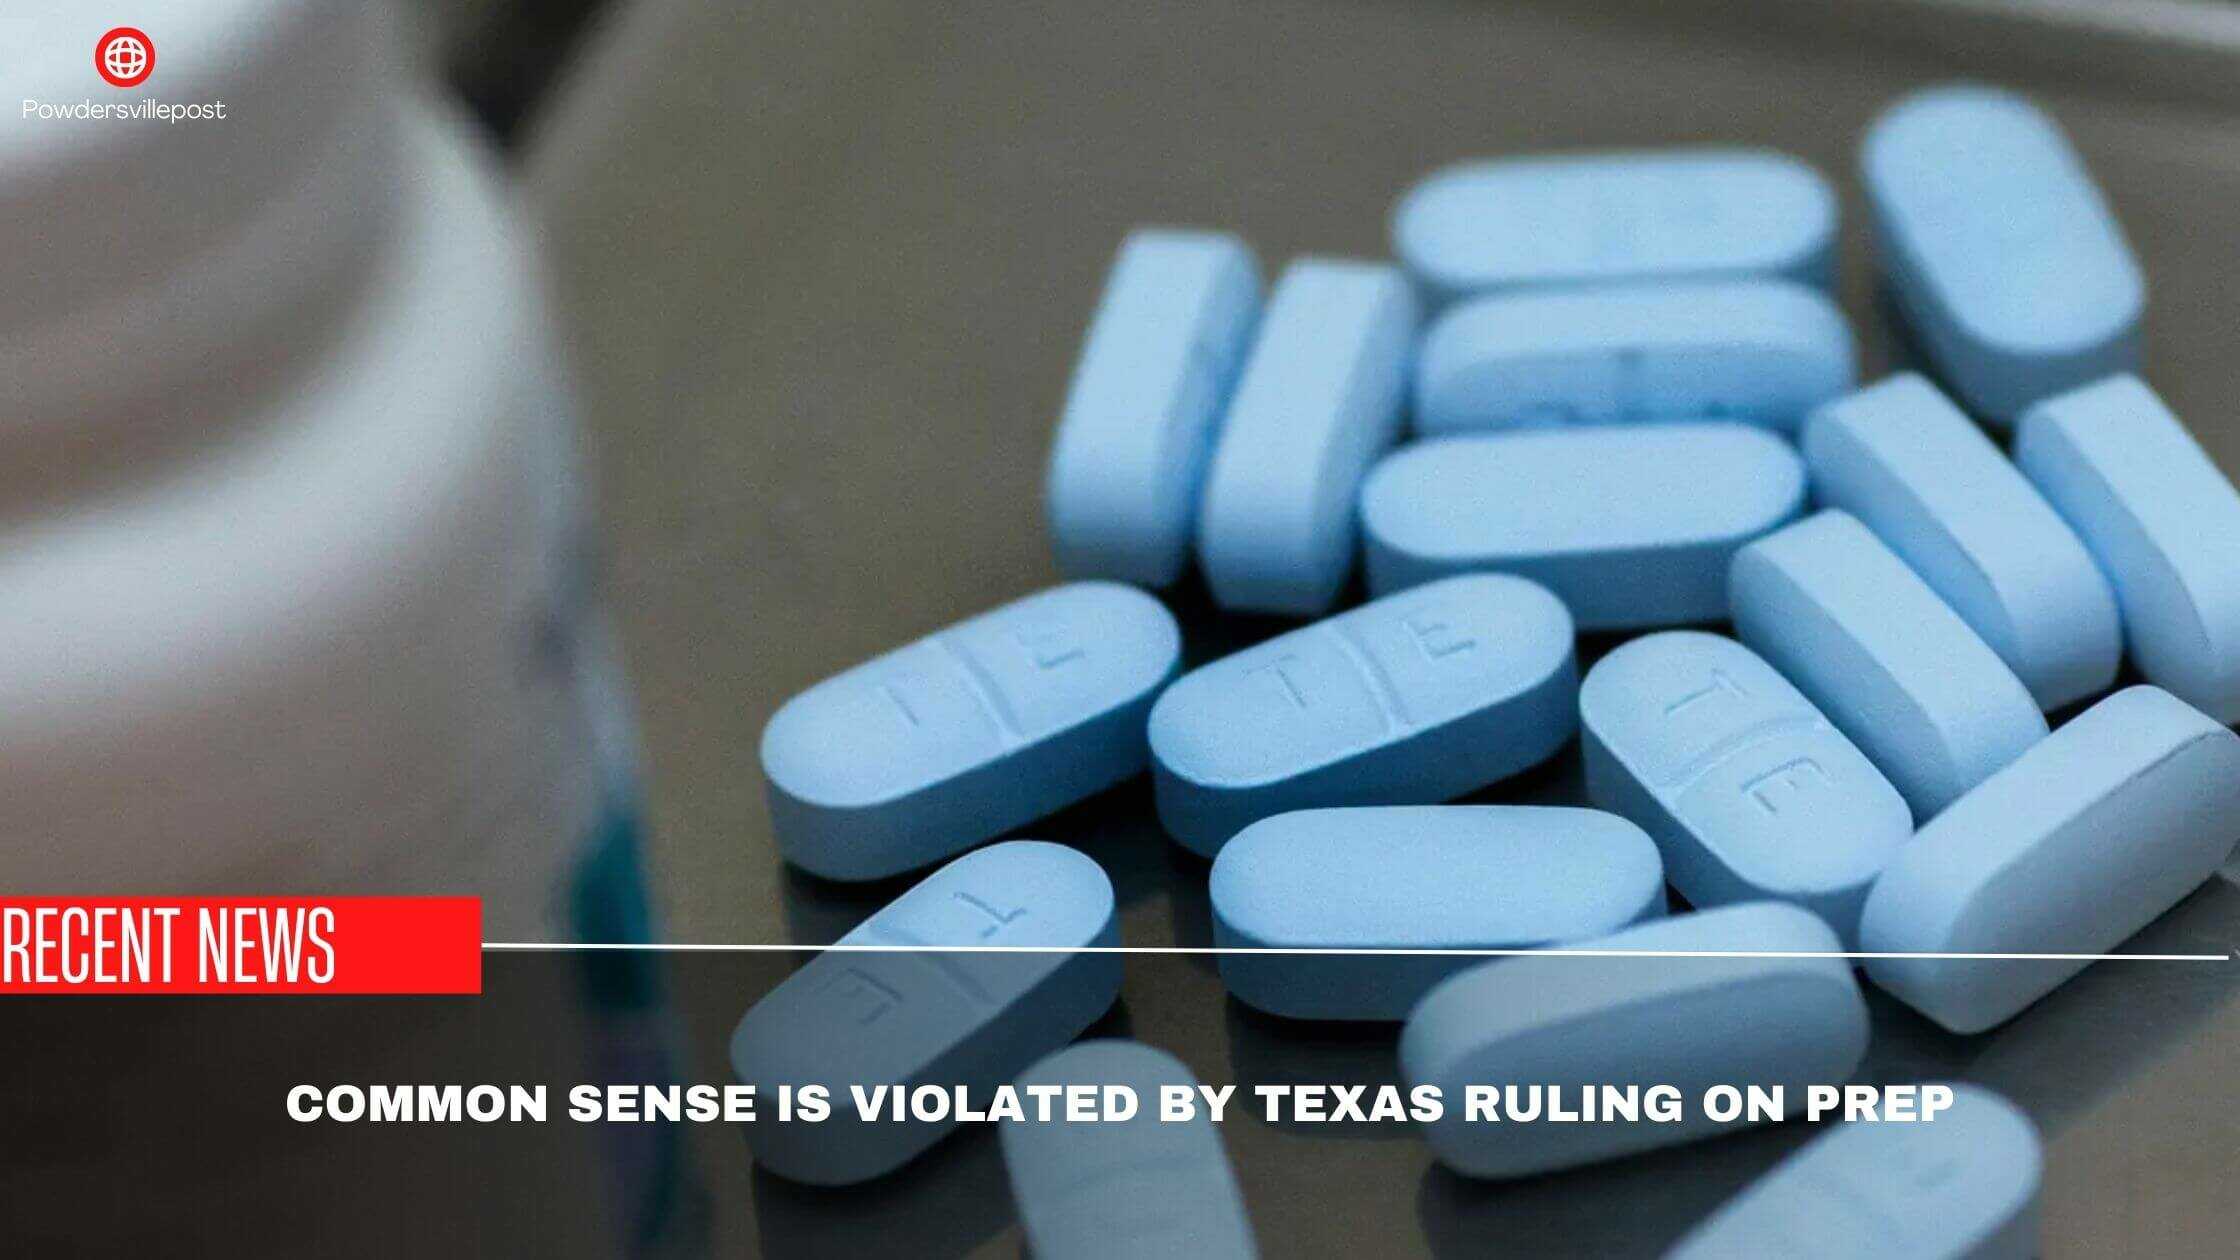 Common Sense Is Violated By Texas Ruling On PrEP